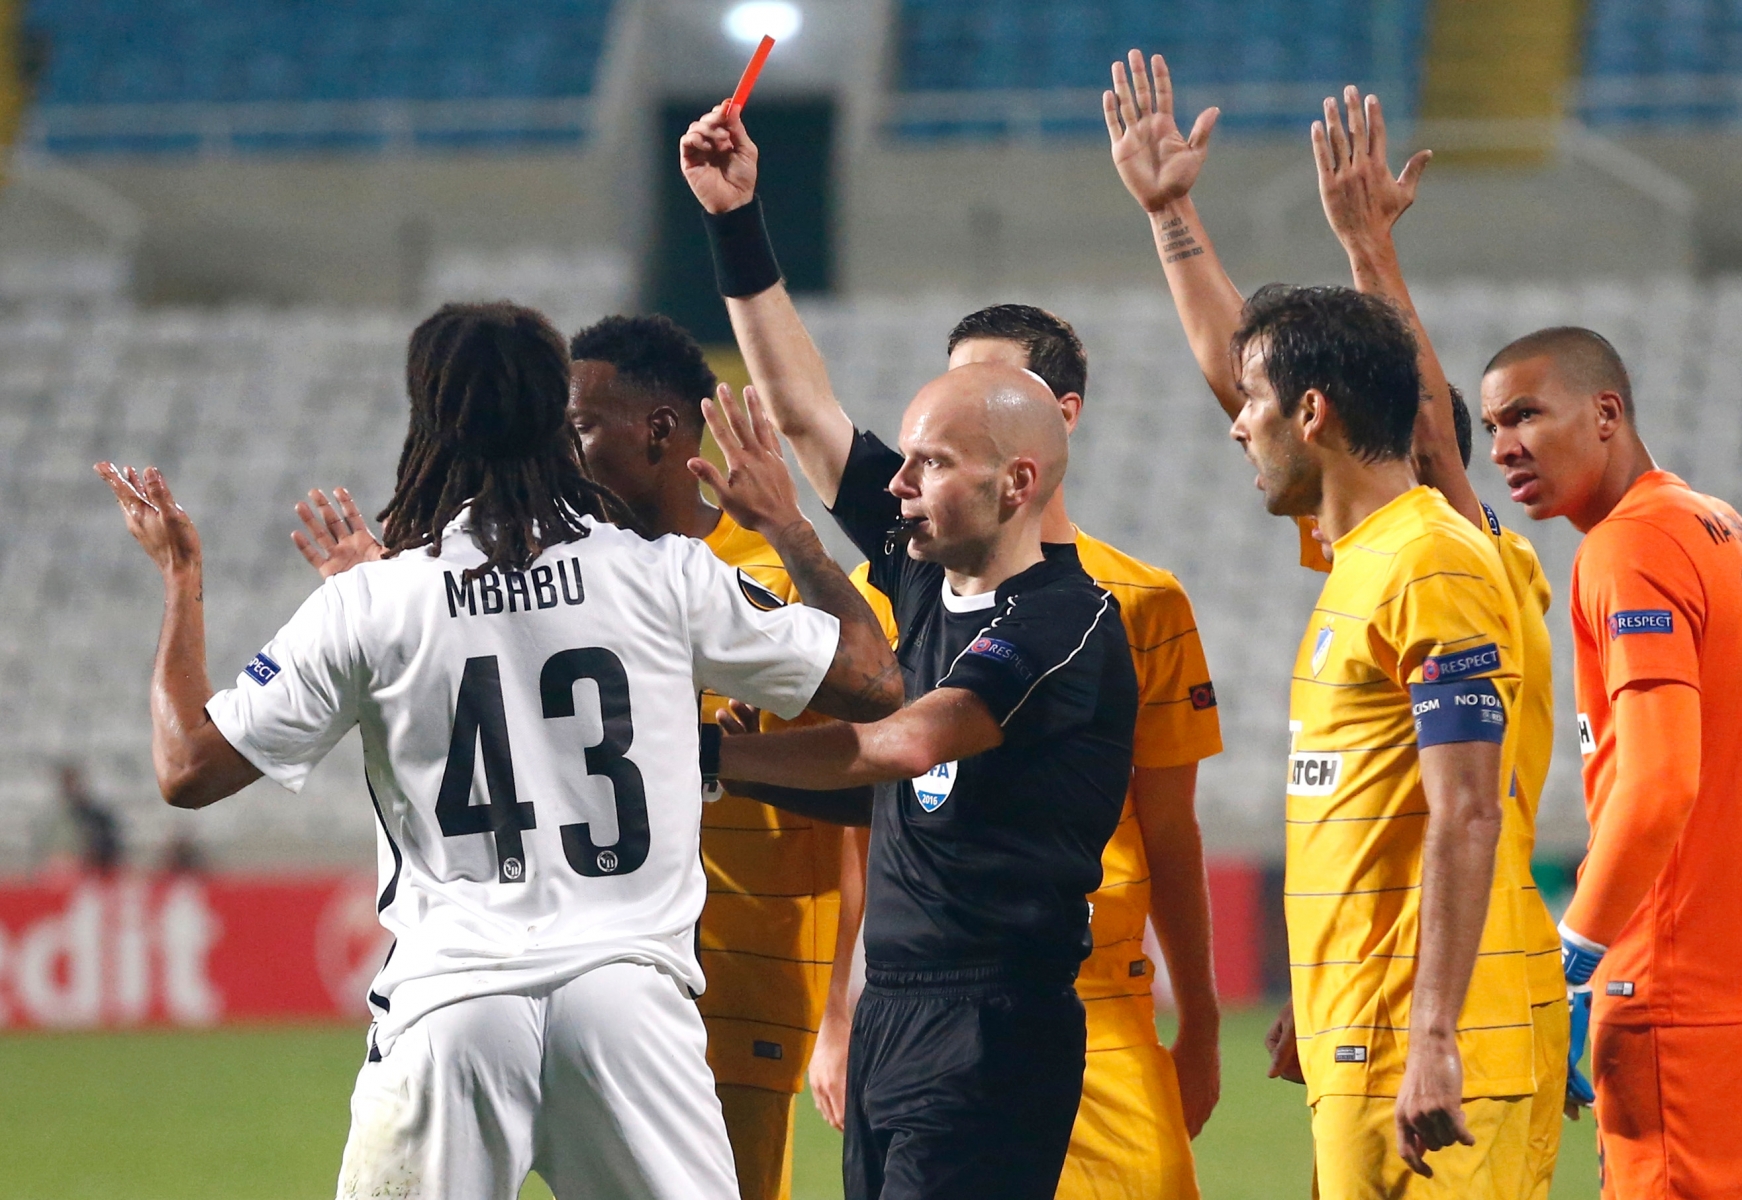 Bern's Kevin Mbabu, left, gets a red card, during the UEFA Europa League group B match between Cyprus' APOEL Nicosia and Switzerland's BSC Young Boys, at the GSP Stadium in Nicosia, Cyprus, on Thursday, November 3, 2016. (KEYSTONE/Thomas Hodel) FUSSBALL EUROPA LEAGUE 2016/17 NIKOSIA YB